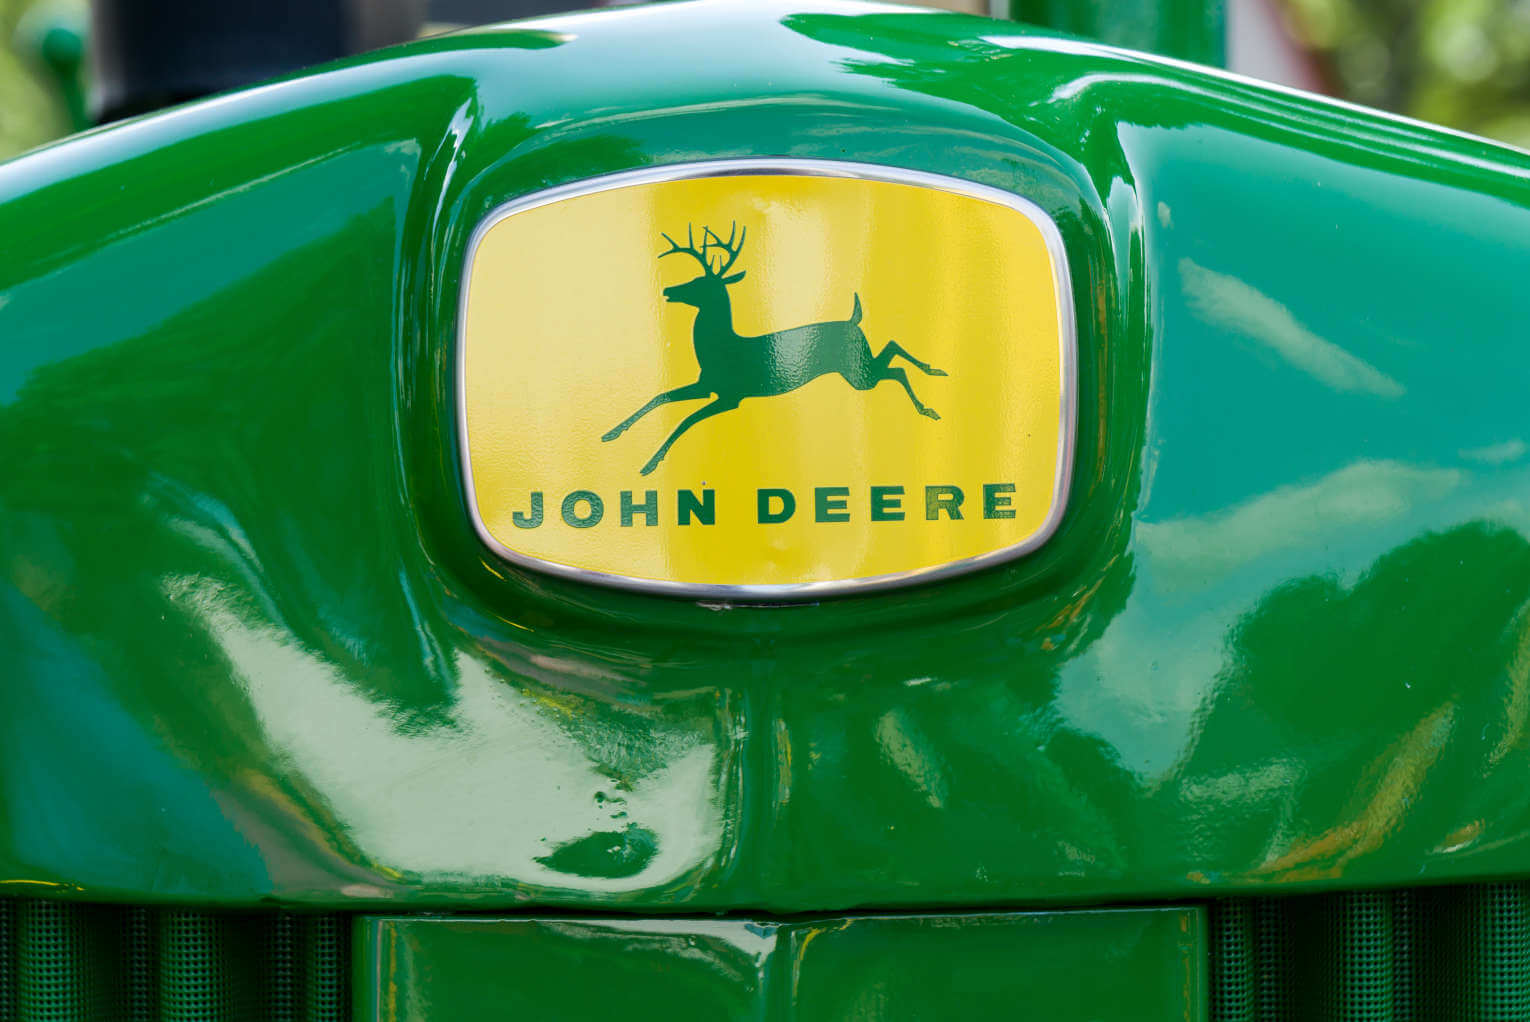 John Deere Under Fire for Exposed Anti-Christian Practices